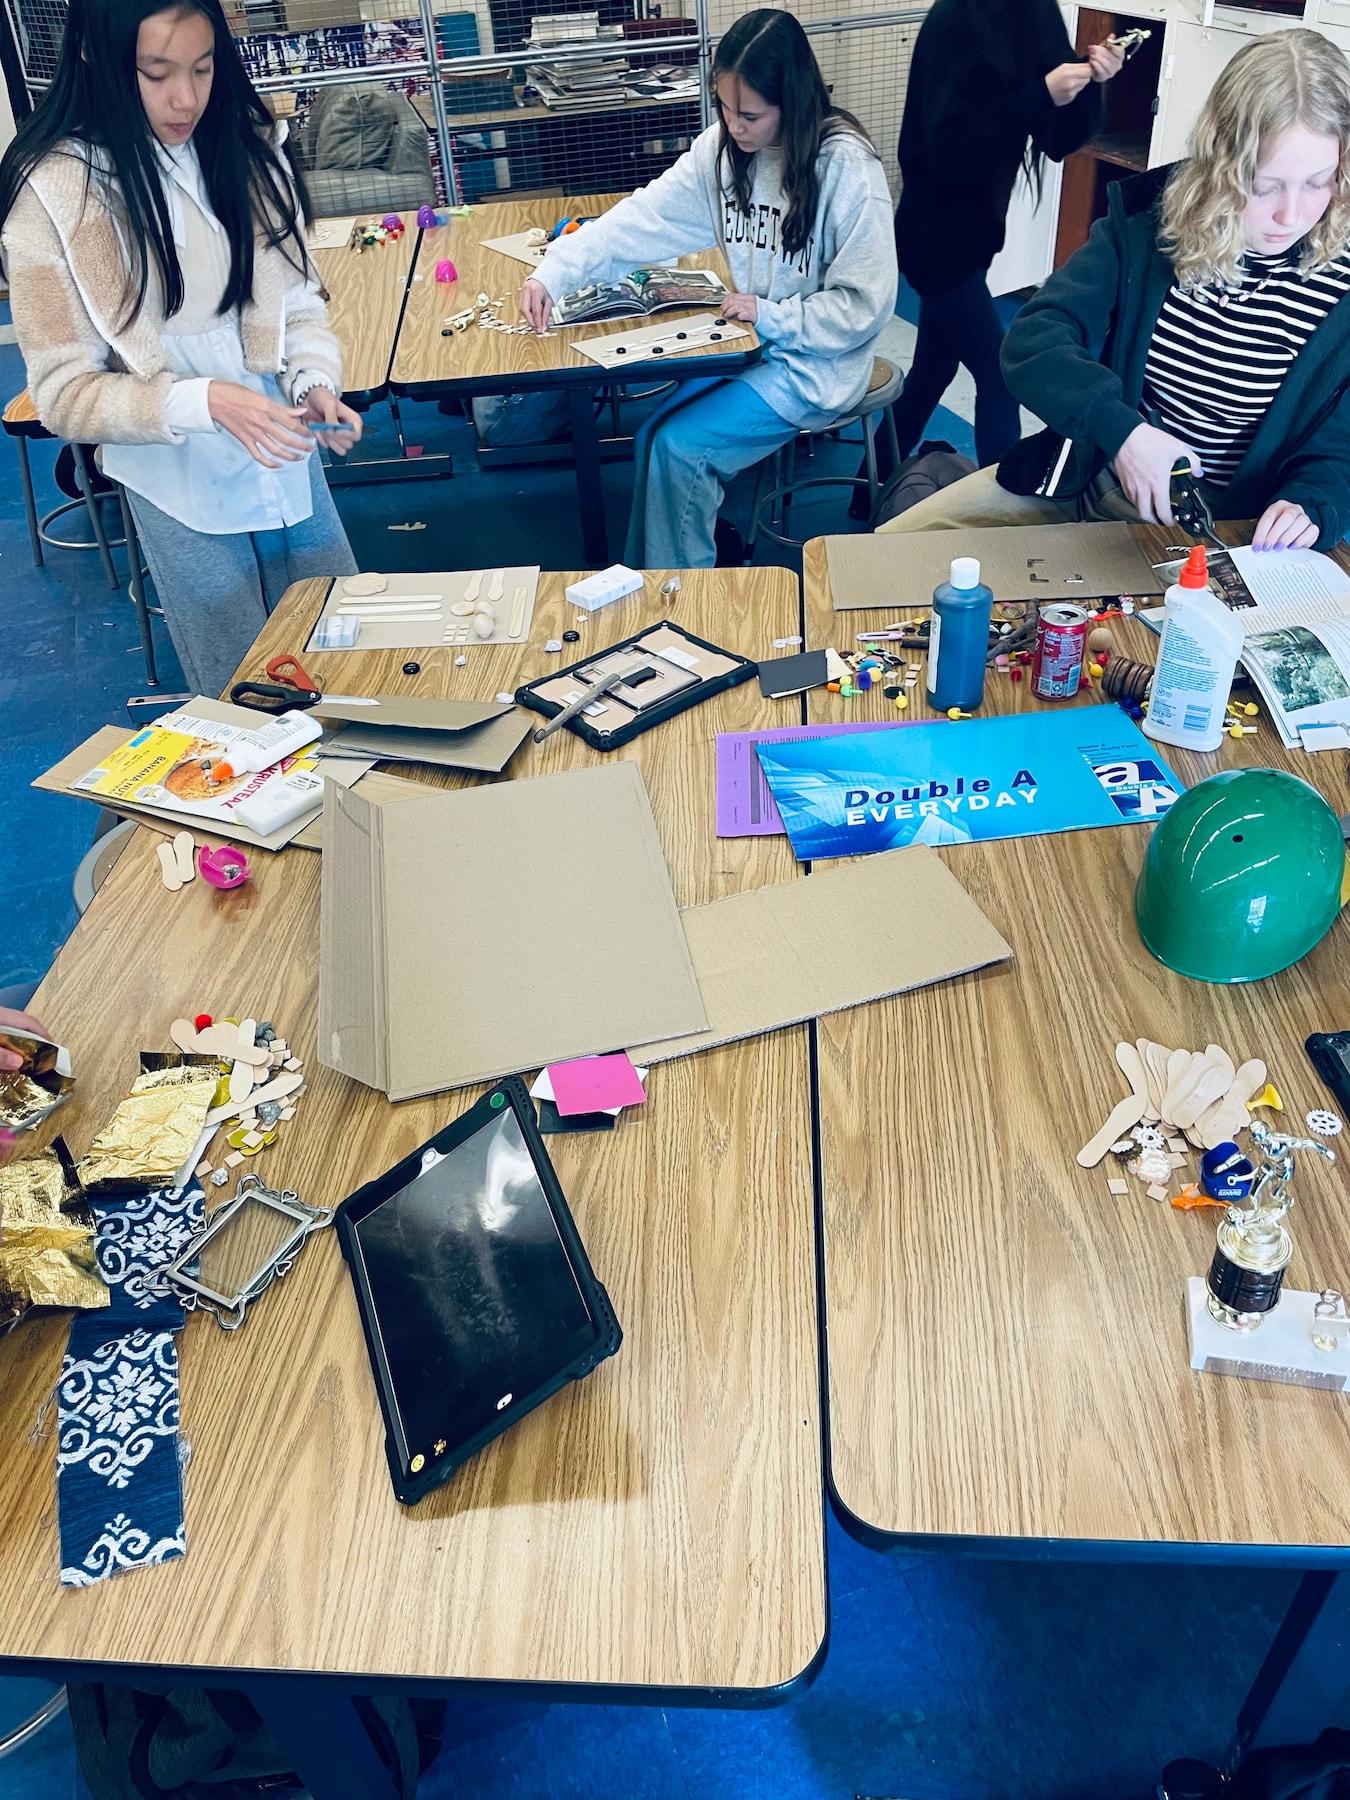 Paul Revere middle schoolers gather their cardboard and found object materials for assemblage project with artist Calder Kamin